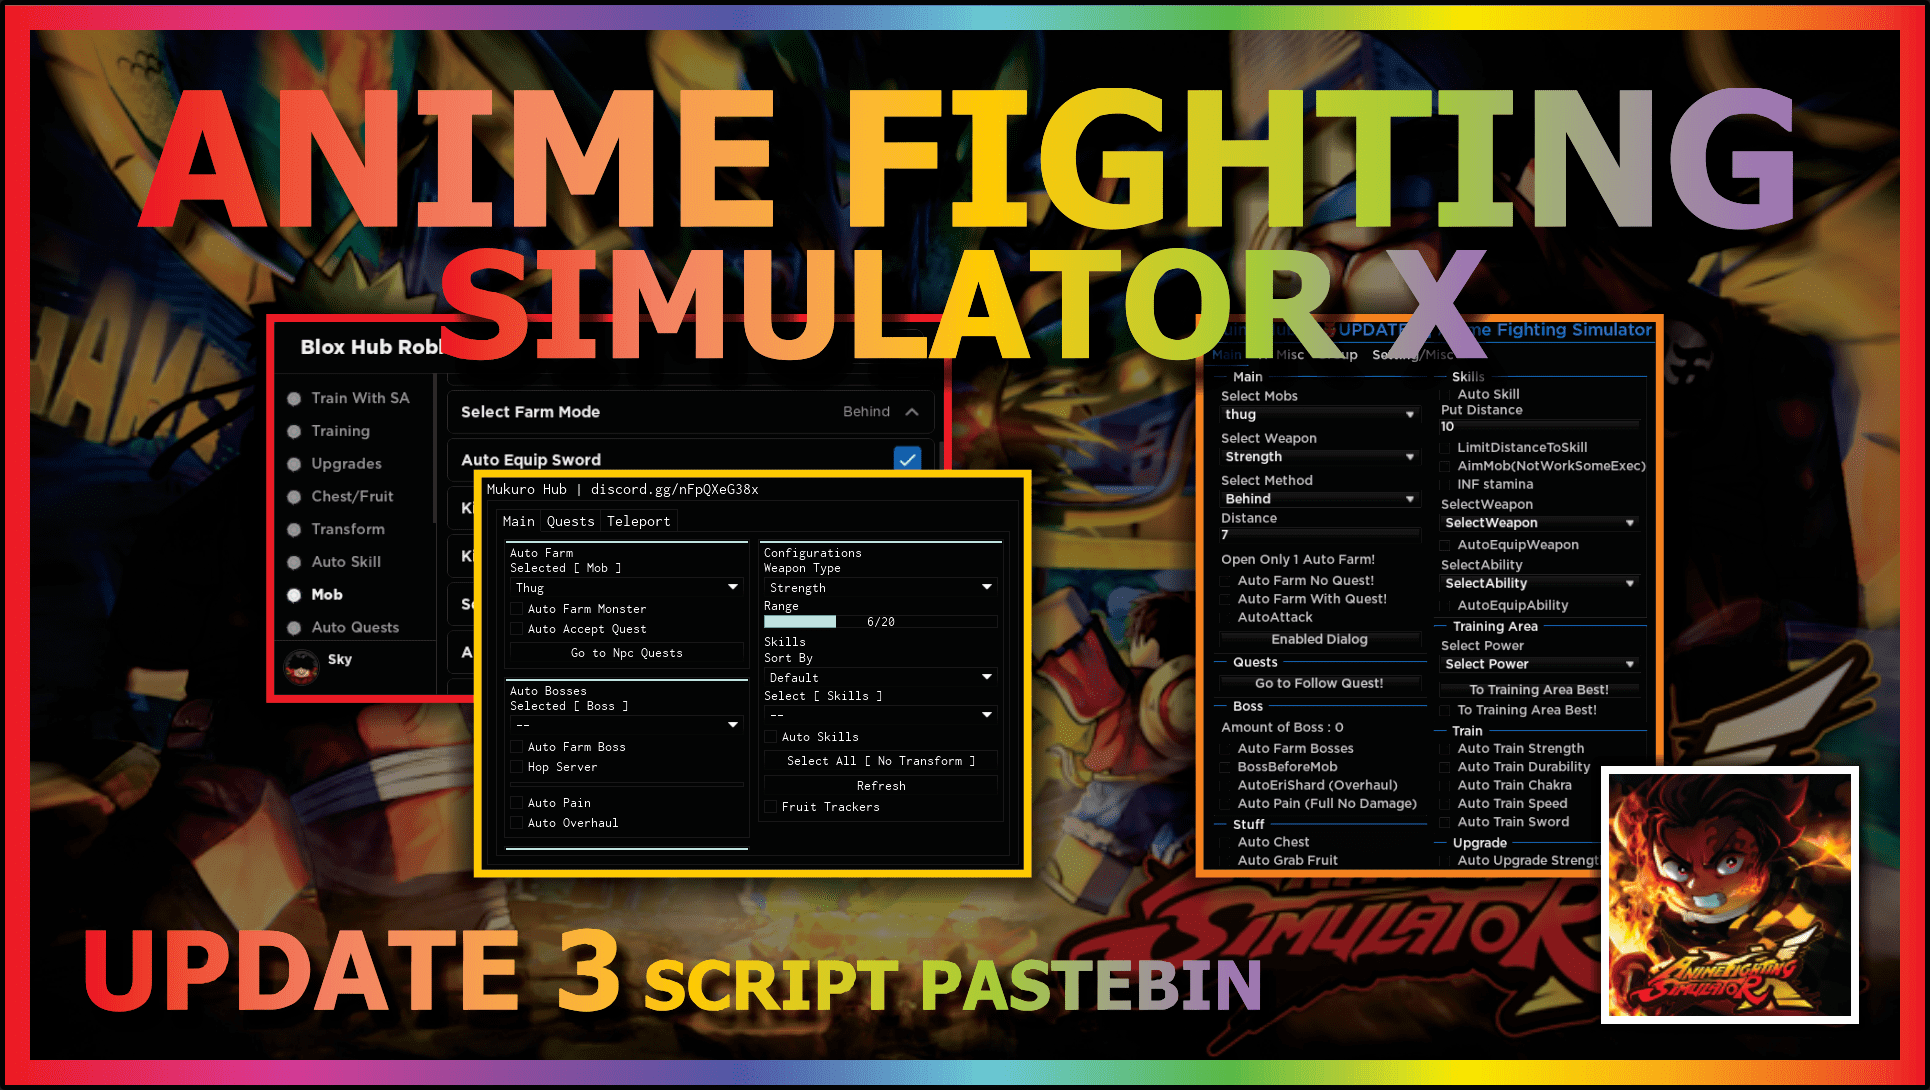 Anime Fighting Simulator X *UPDATE 6* is TODAY